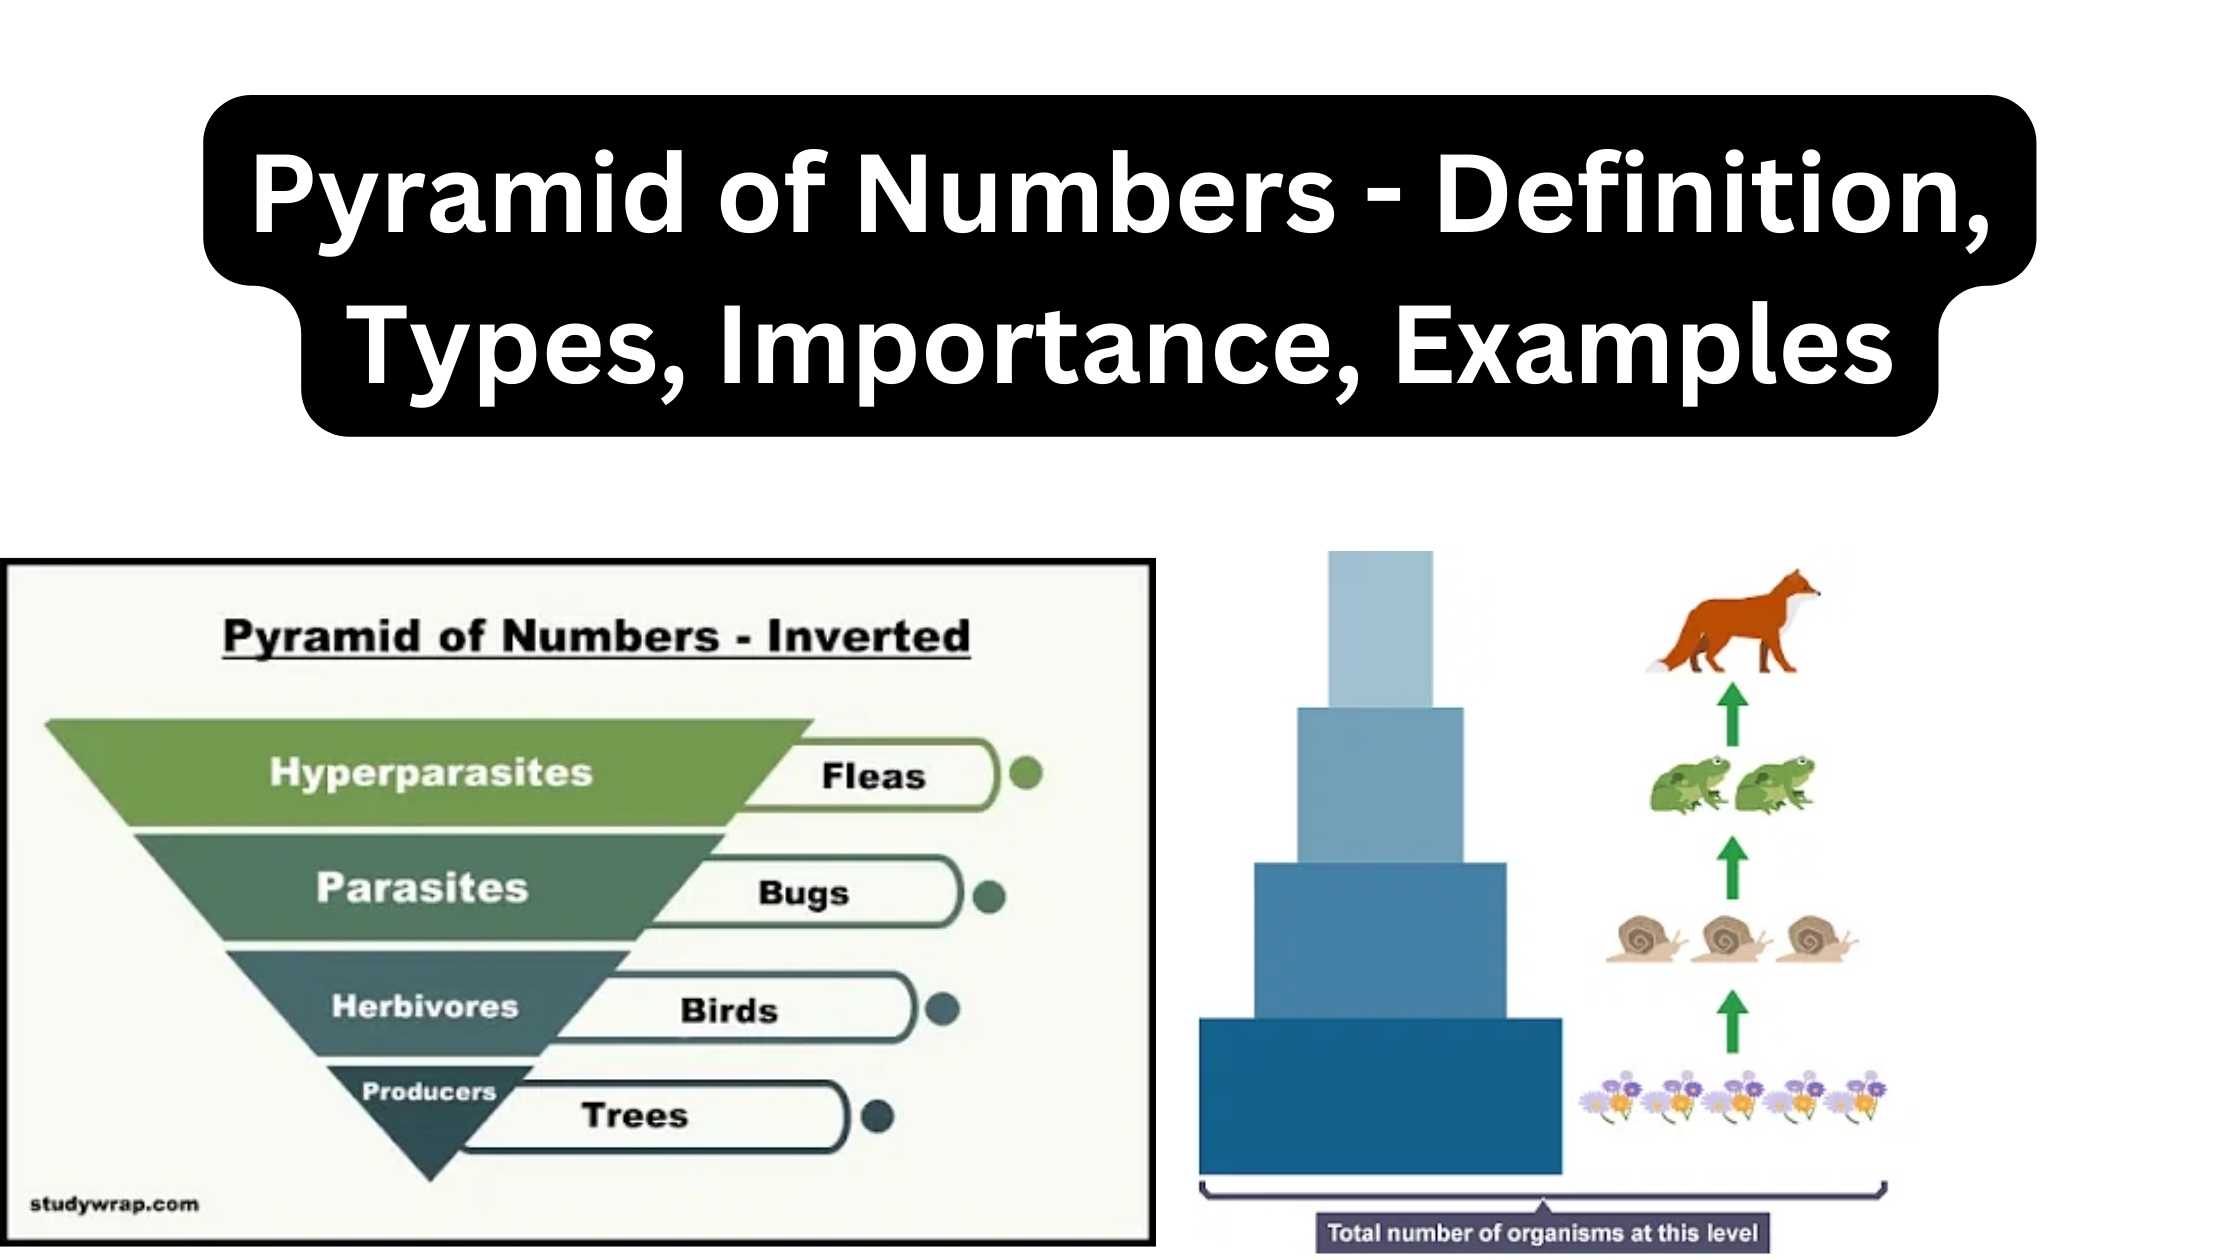 Pyramid of Numbers - Definition, Types, Importance, Examples